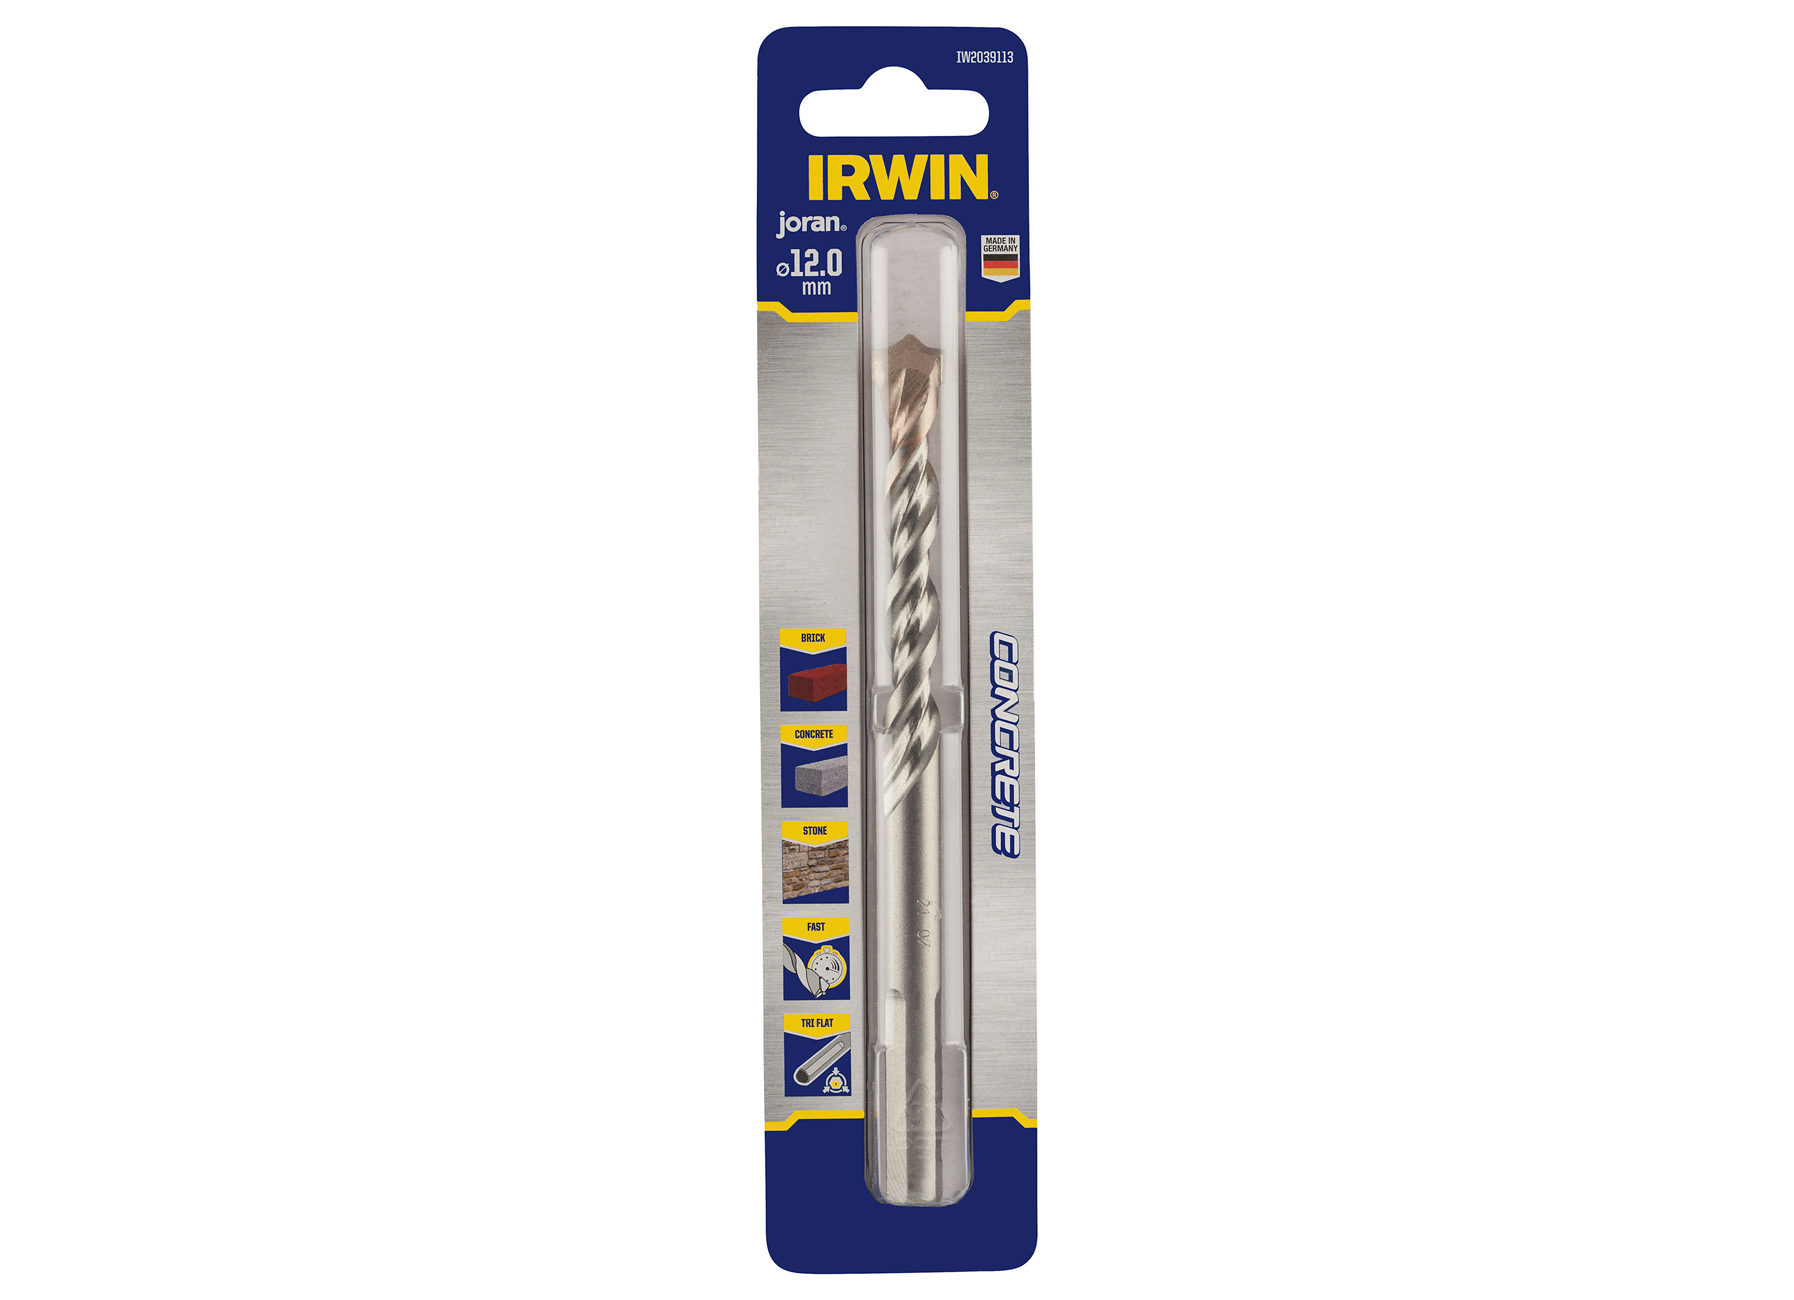 IRWIN FORET A BETON 12.0X160MM